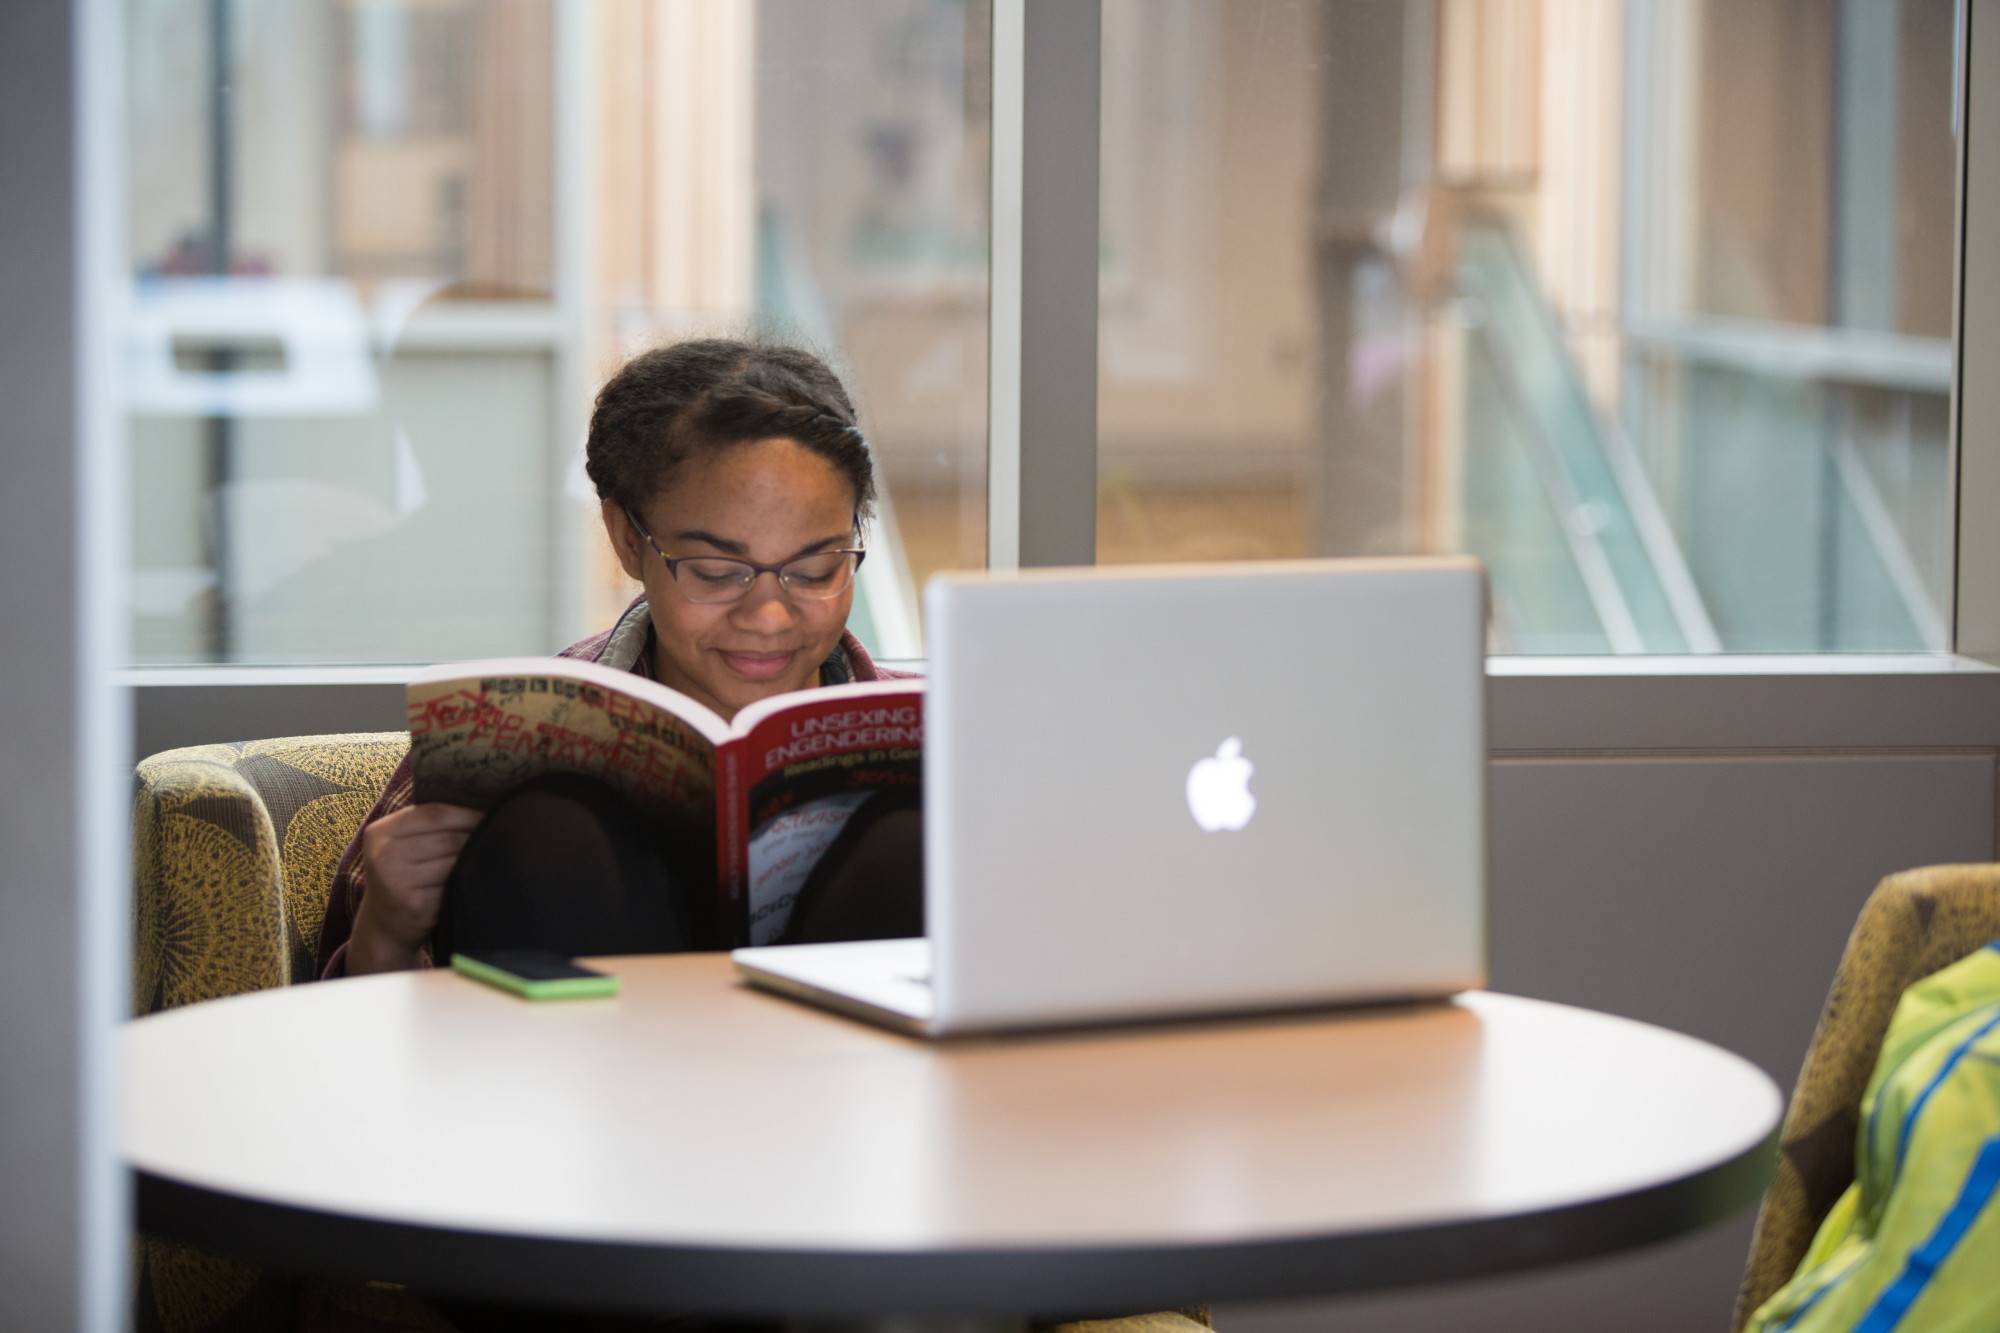 A GVSU student in the library on her computer.